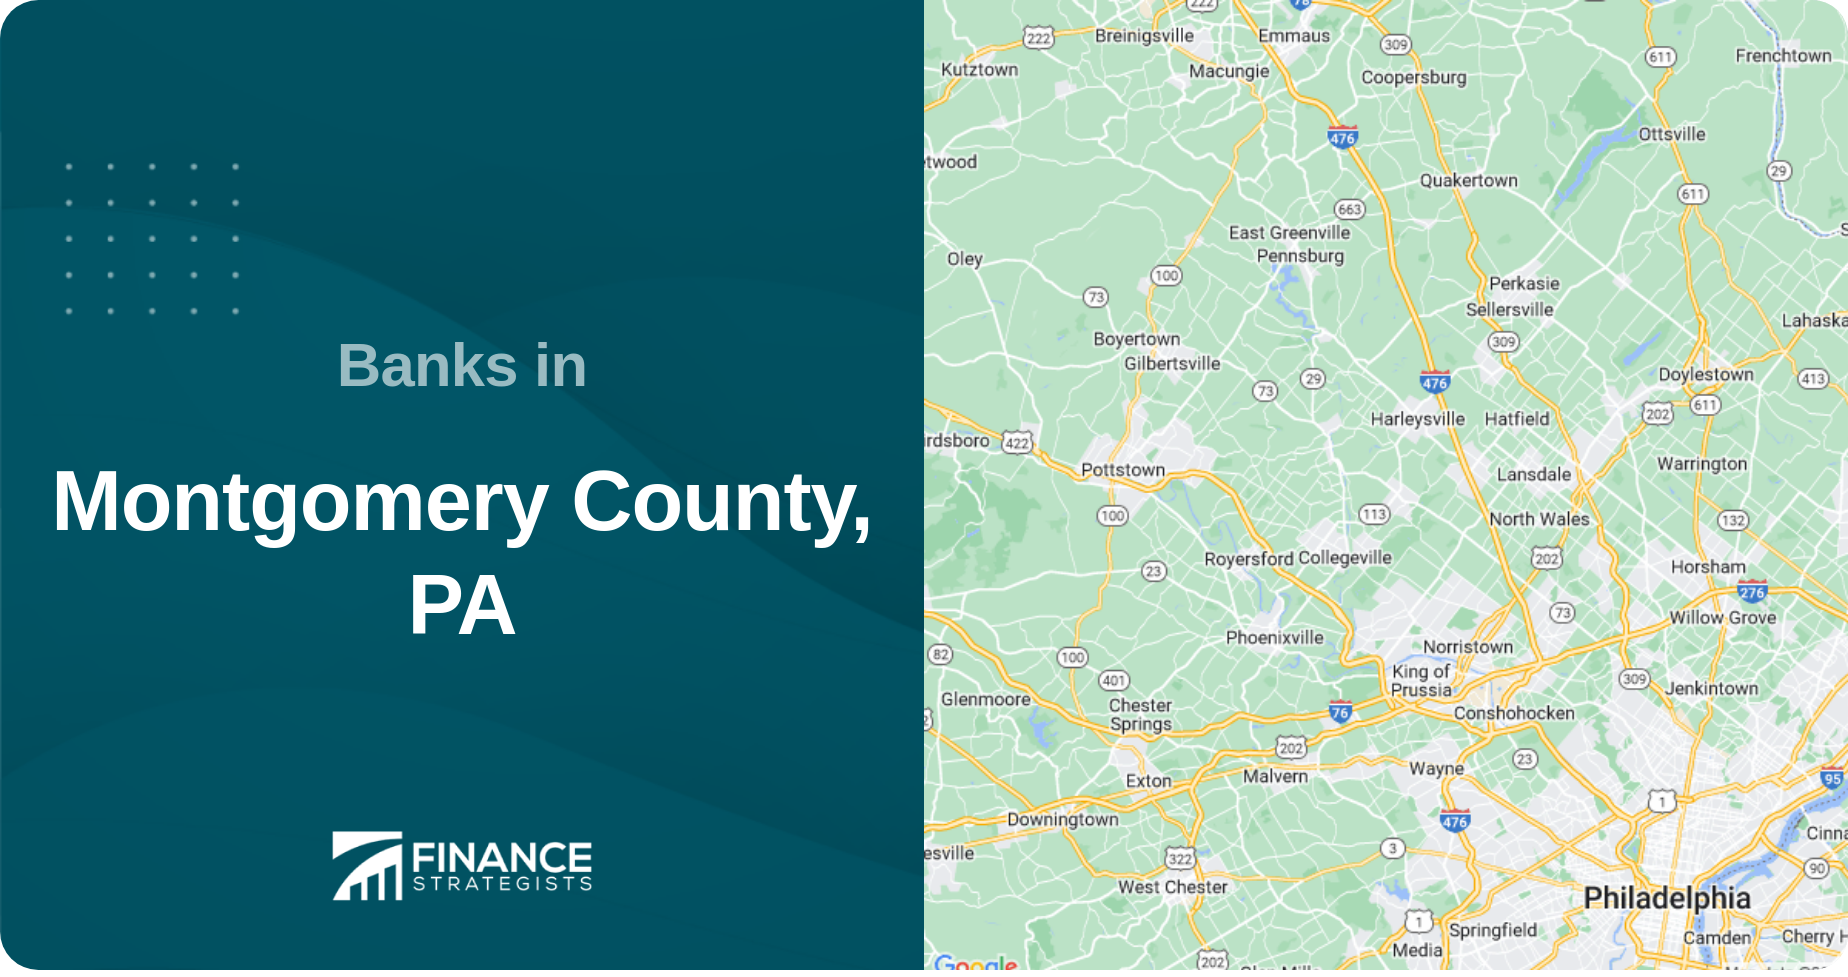 Banks in Montgomery County, PA